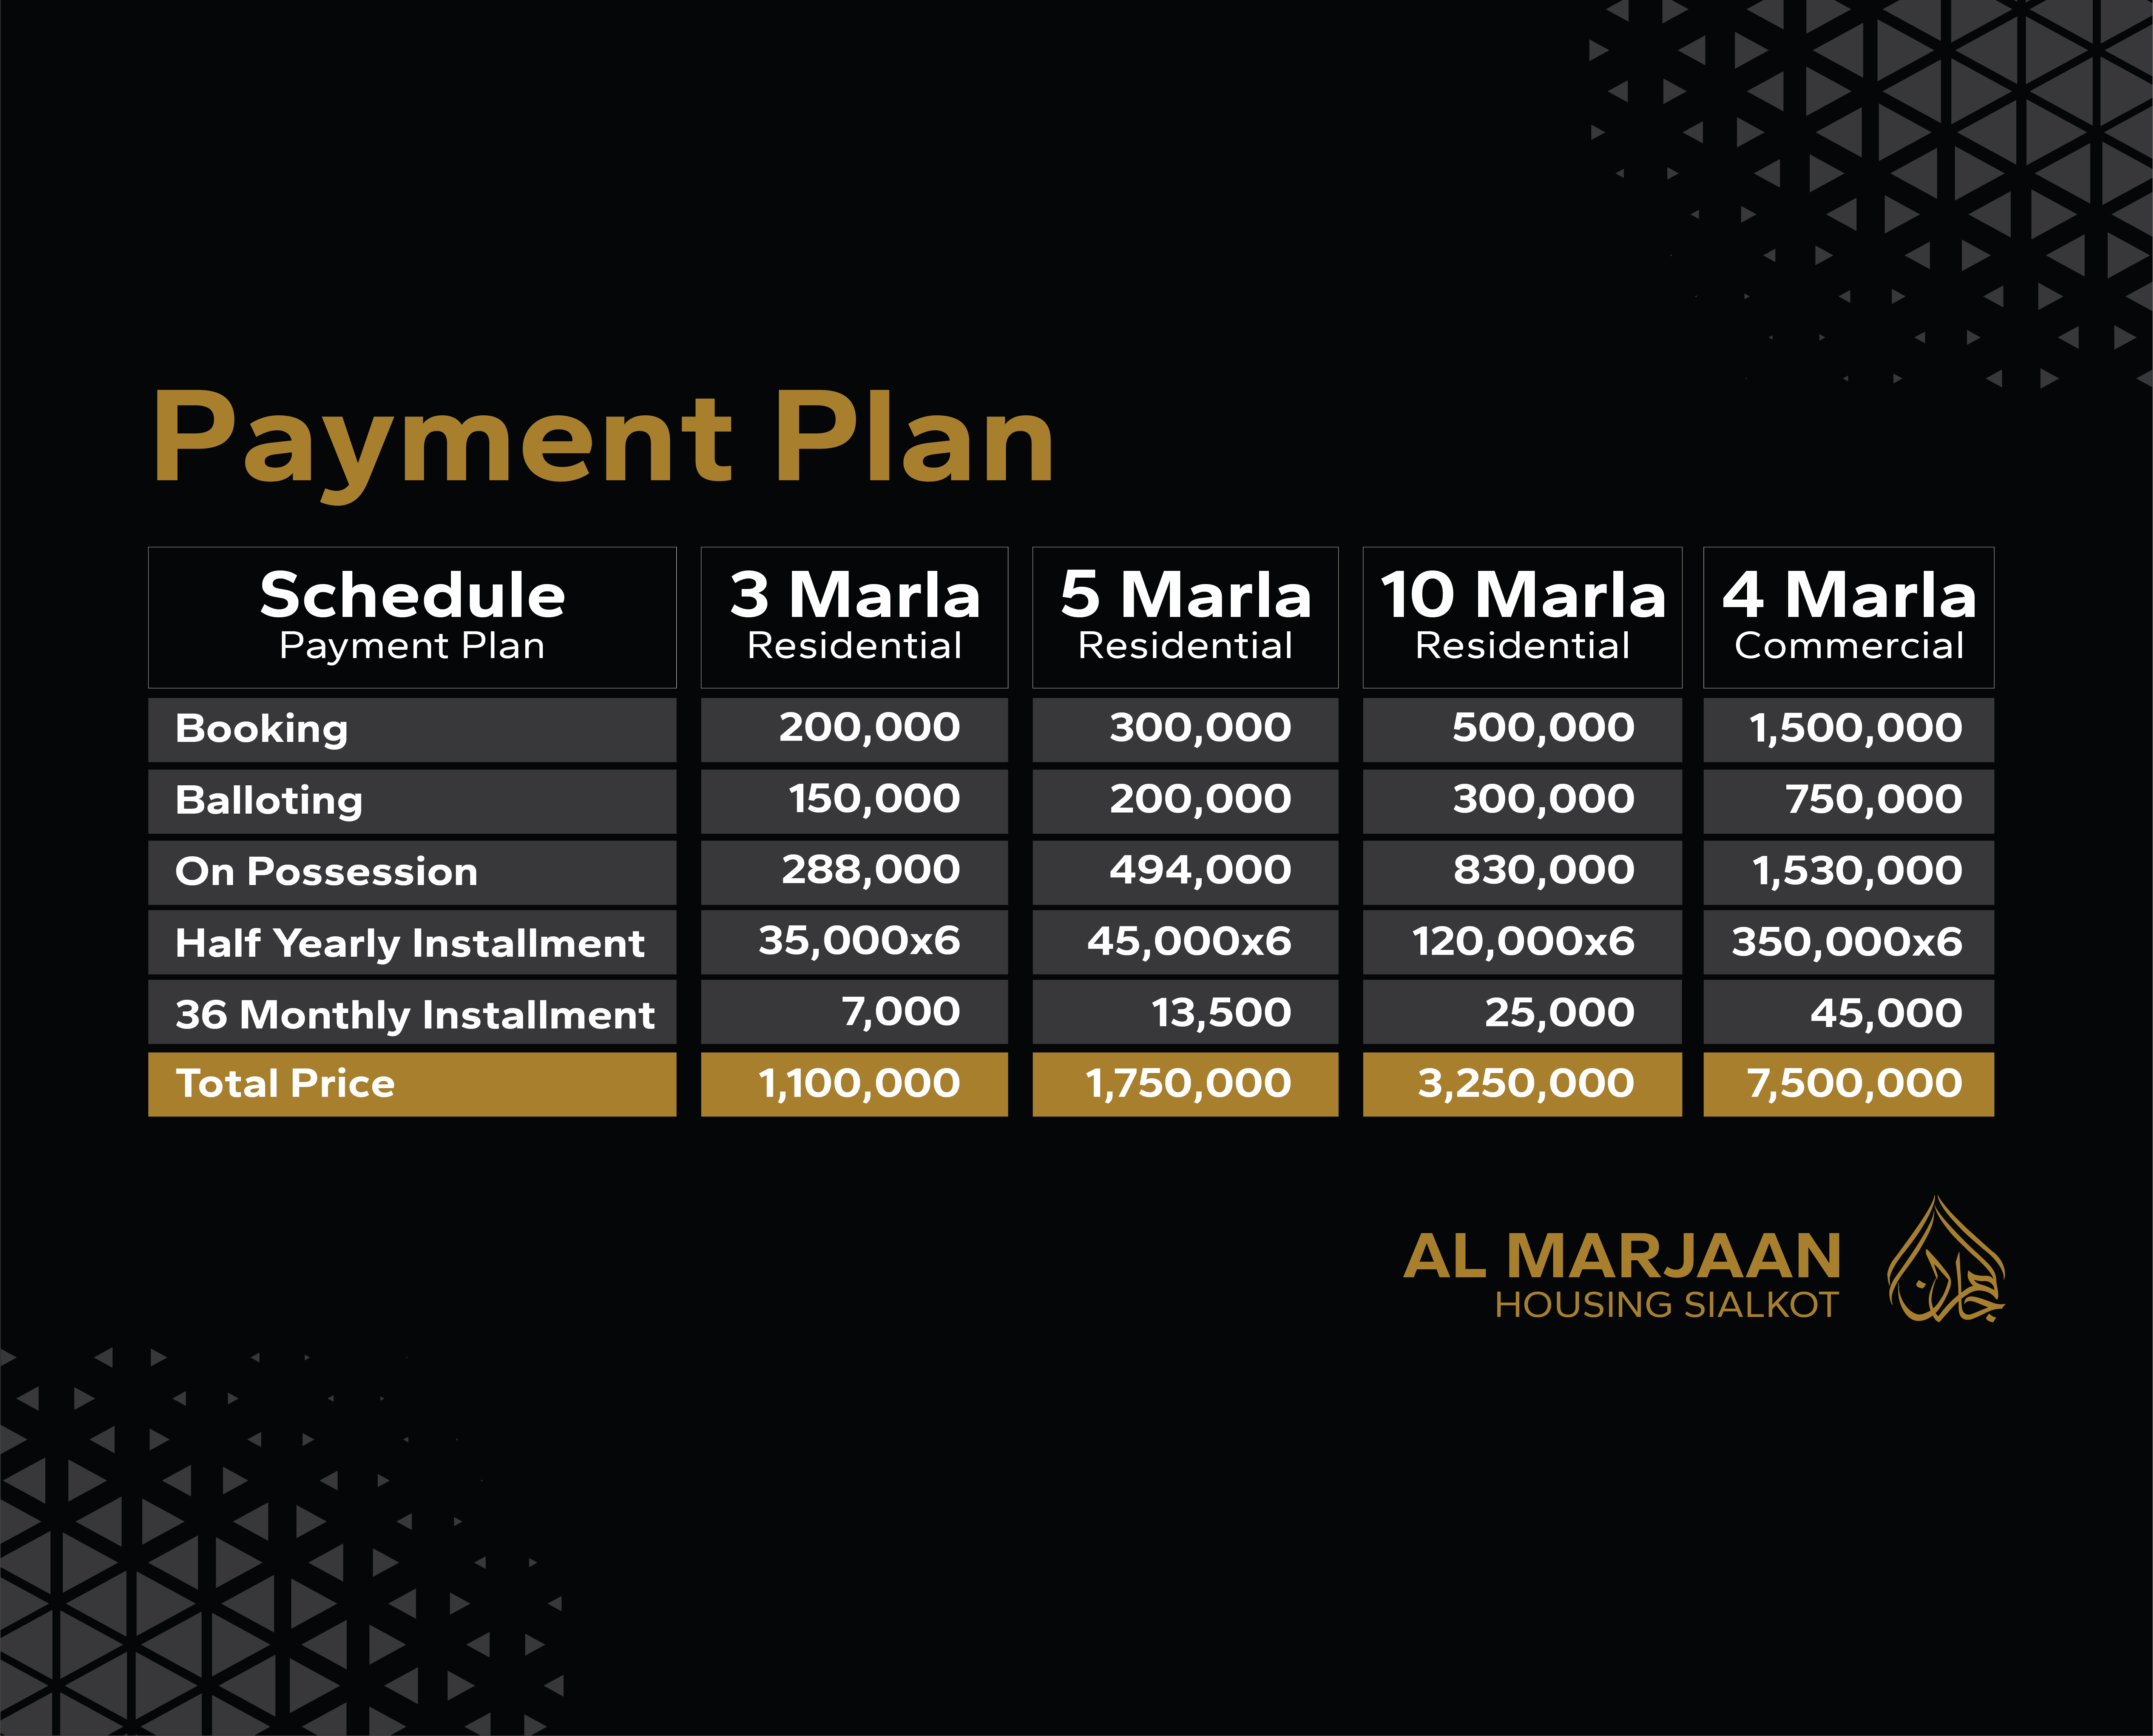 Al Marjaan Housing Sialkot, Fast Marketing consultants, fast marketing, Al Marjaan Housing Sialkot payment plans